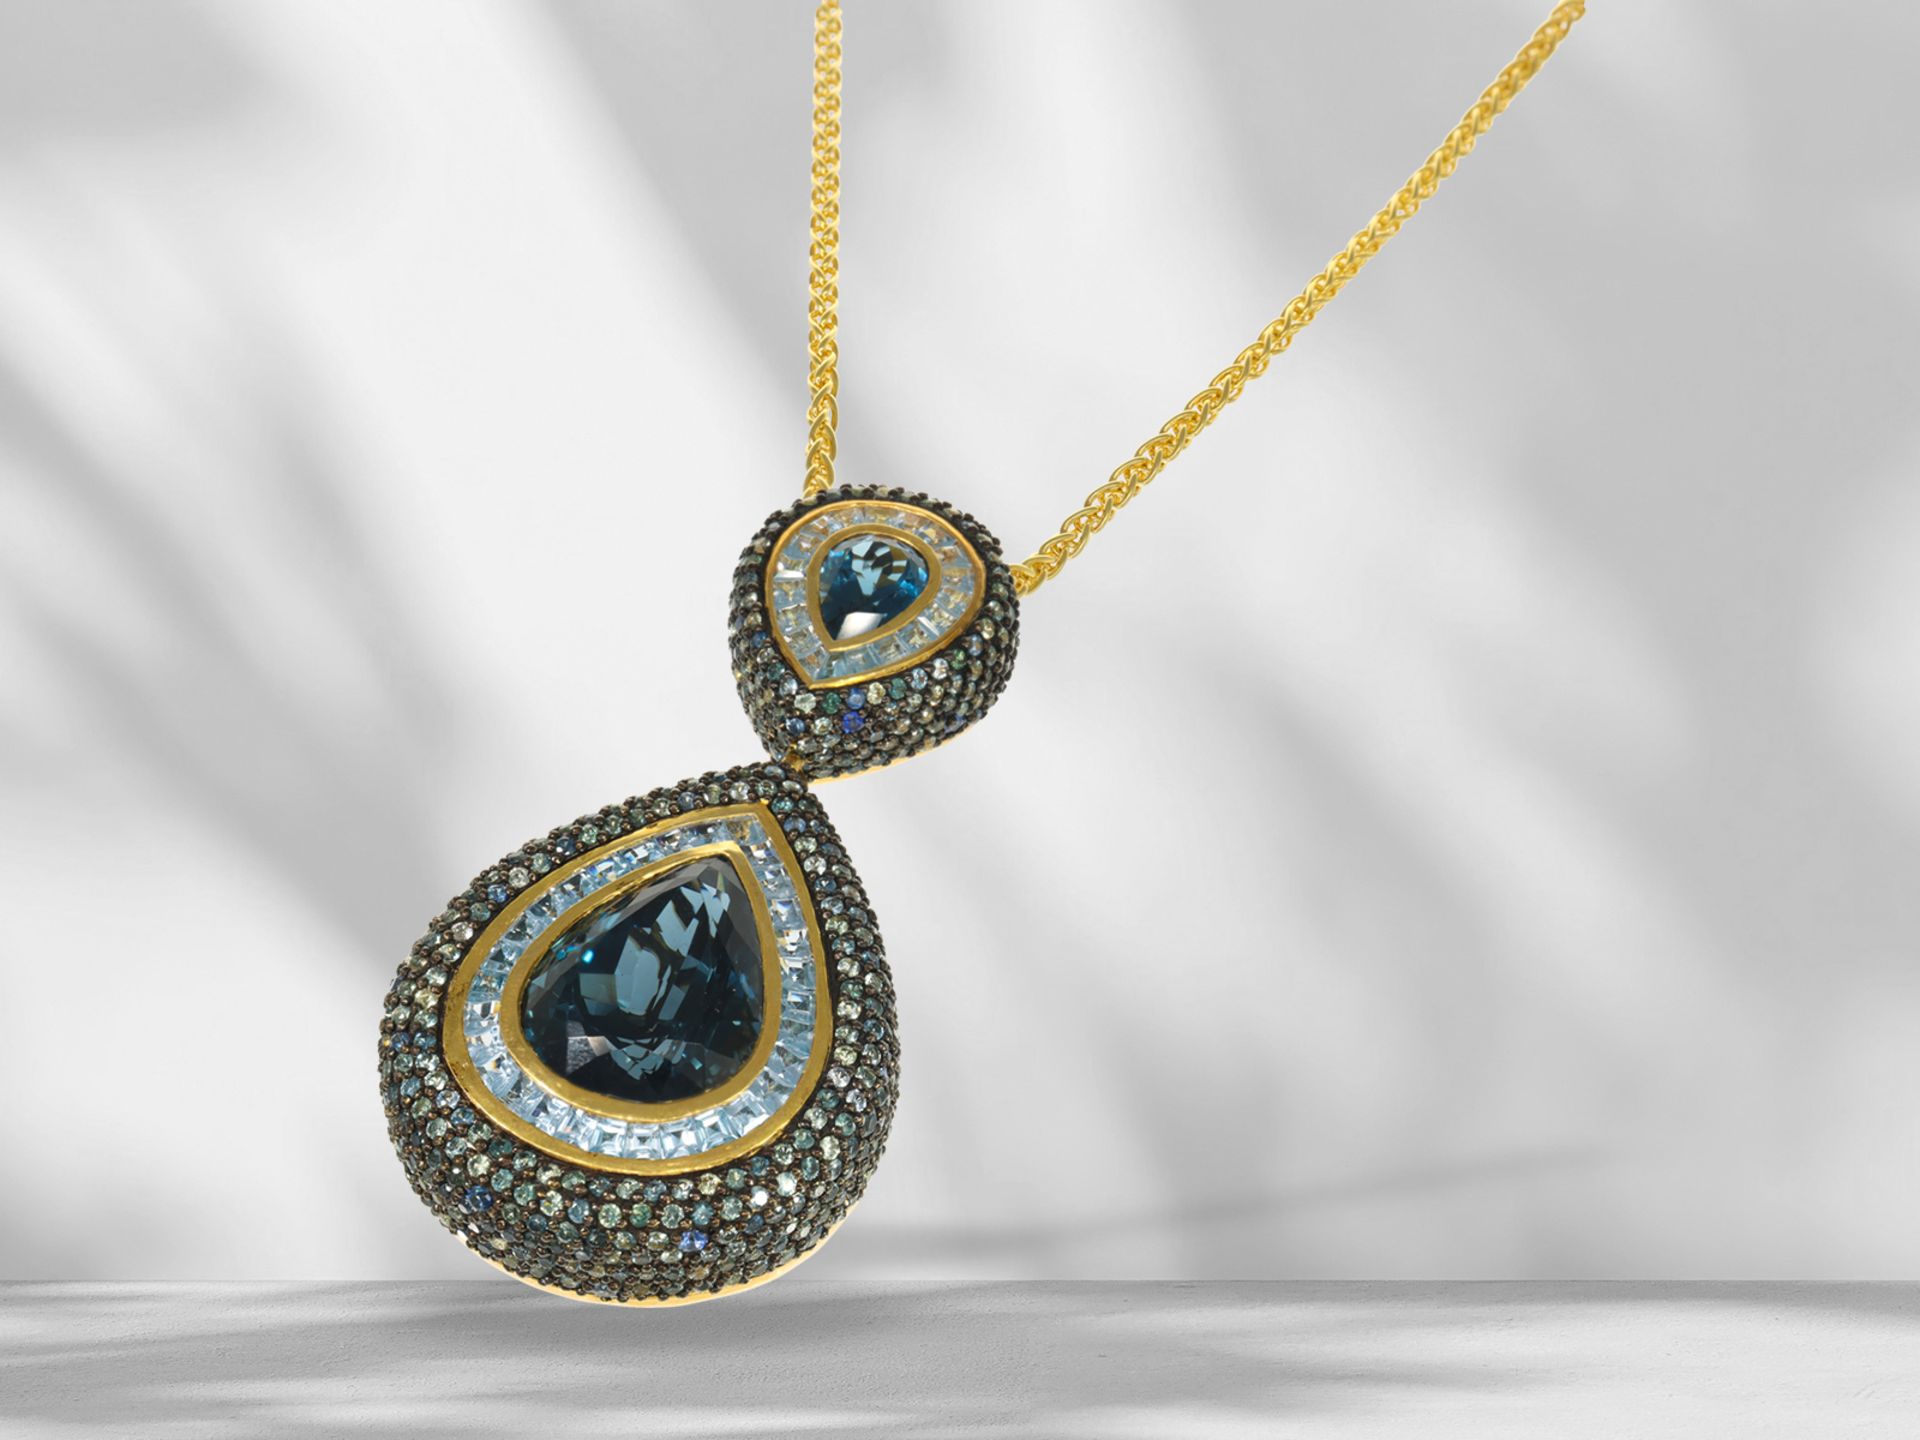 Fancy, like new designer necklace set with topazes and sapphires - Image 2 of 4